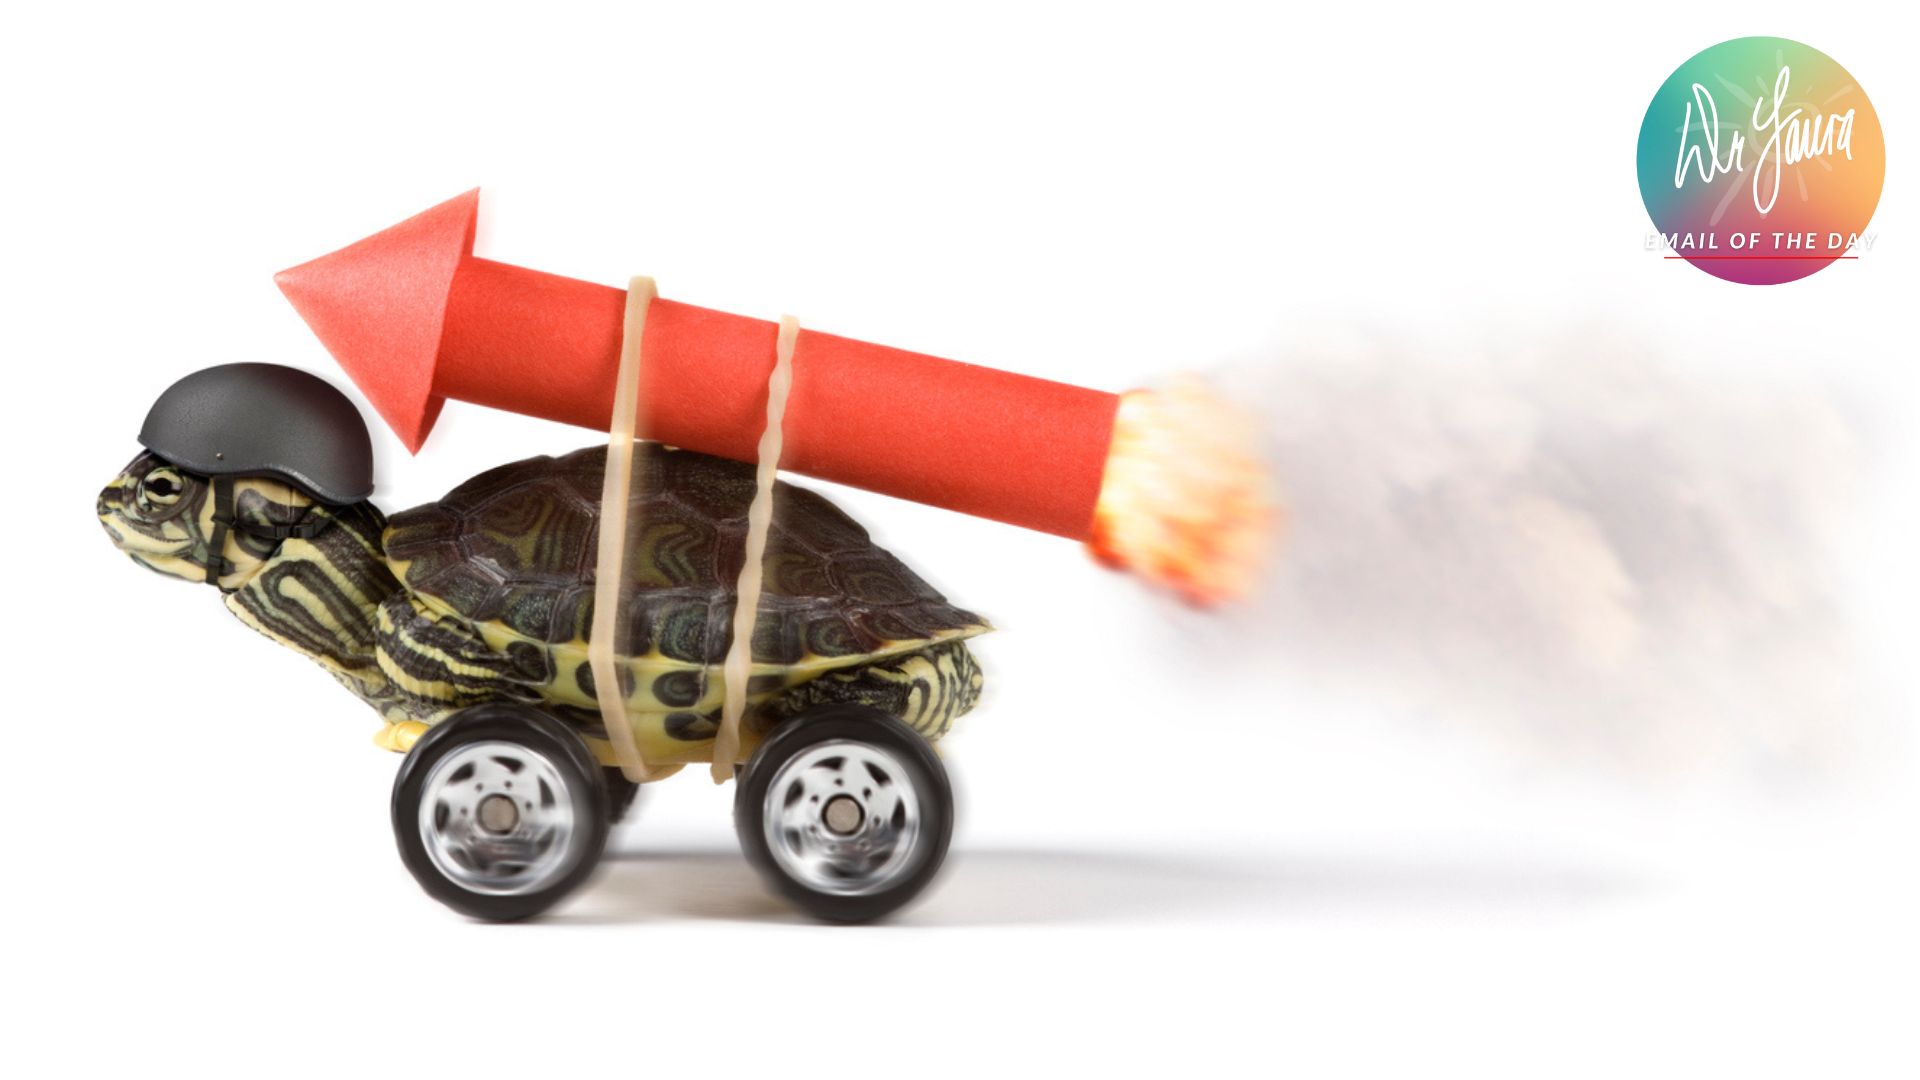 Turtle has wheel attached beneath him with a strapped on dynamite piece